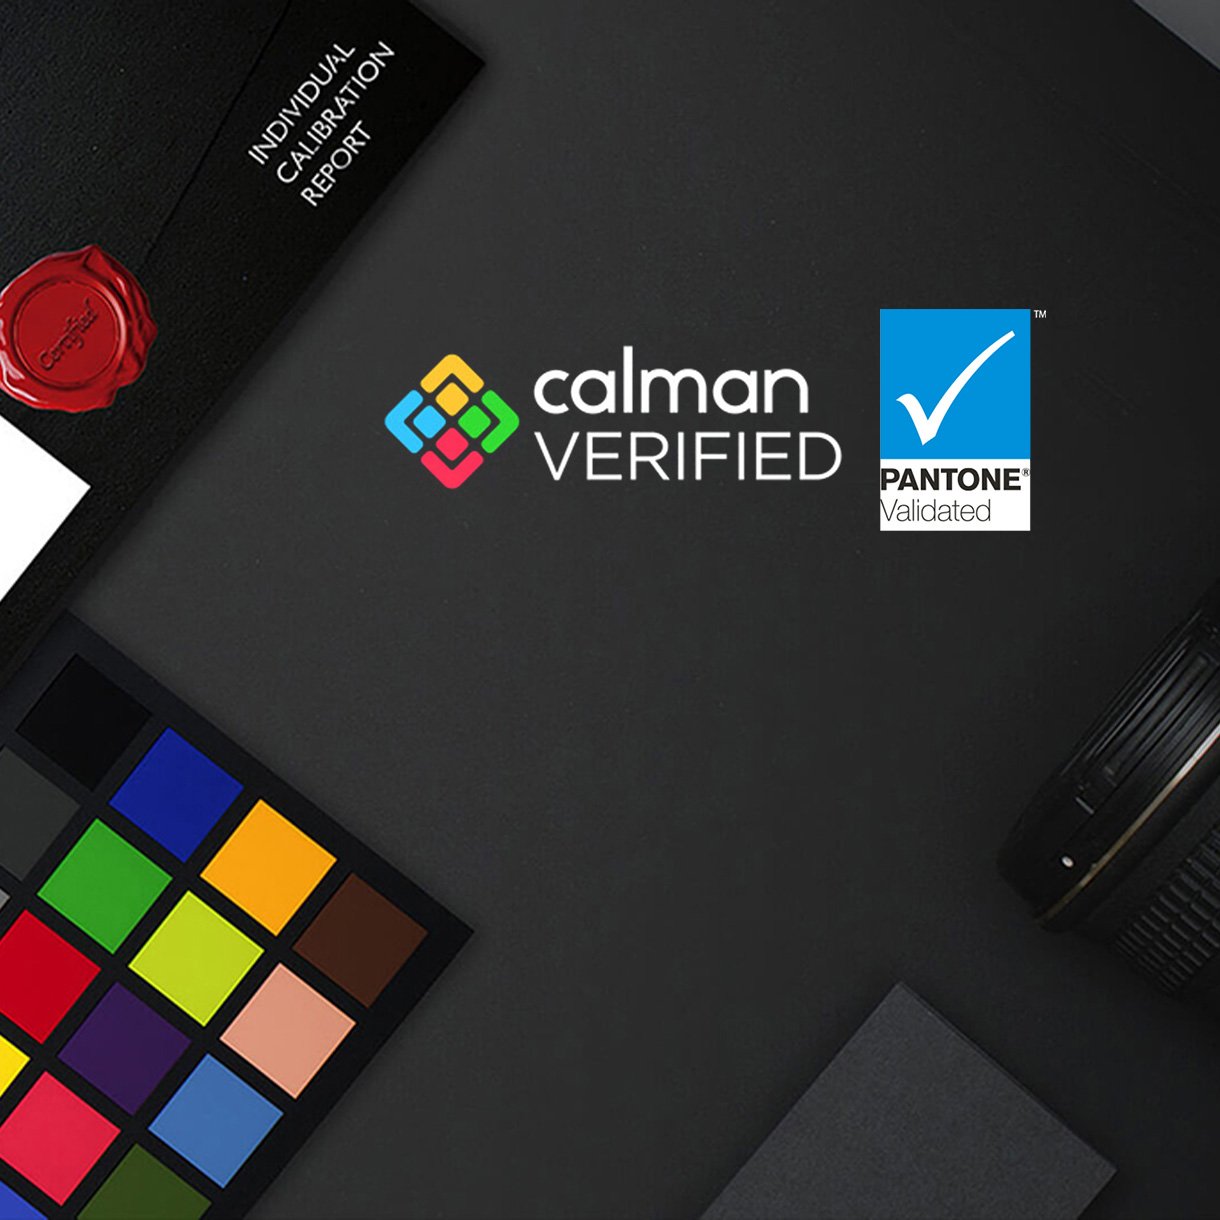 BenQ PD2725U earns Calman Verified and Pantone Validated status. Creative professionals demand excellence, and BenQ delivers.